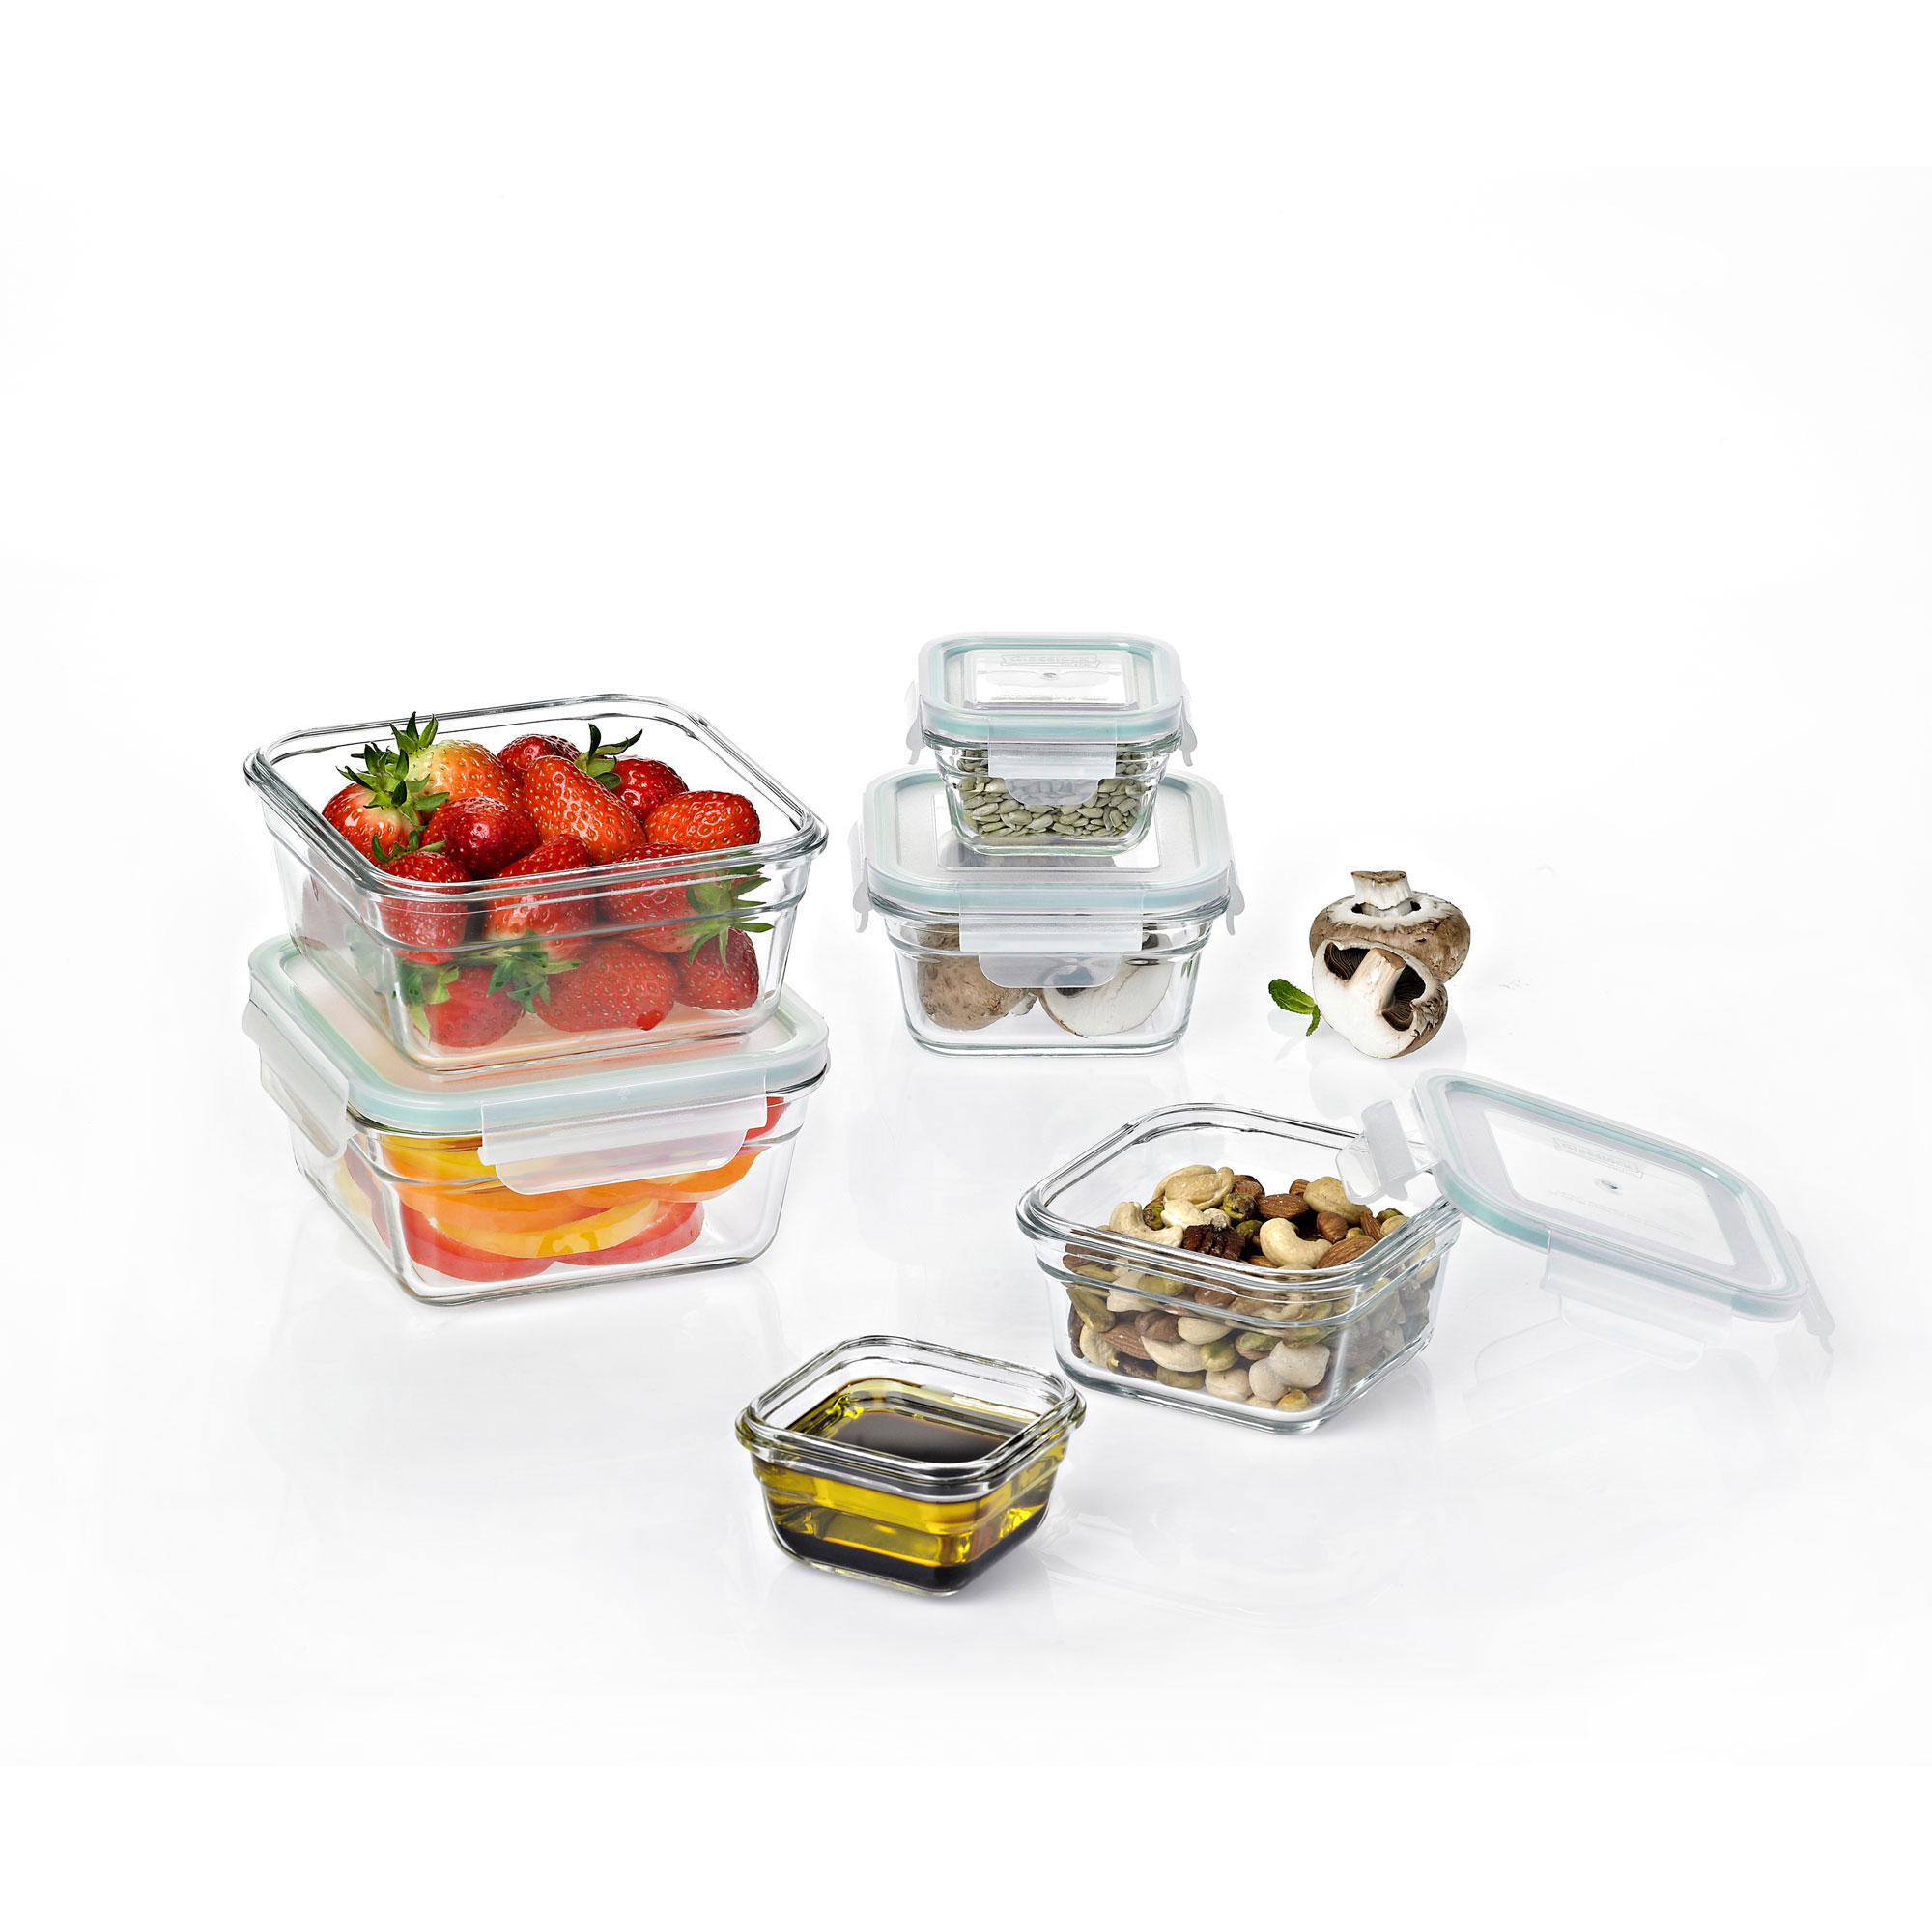 Glasslock Oven and Microwave Safe Glass Food Storage Containers 12 Piece Set - image 2 of 8